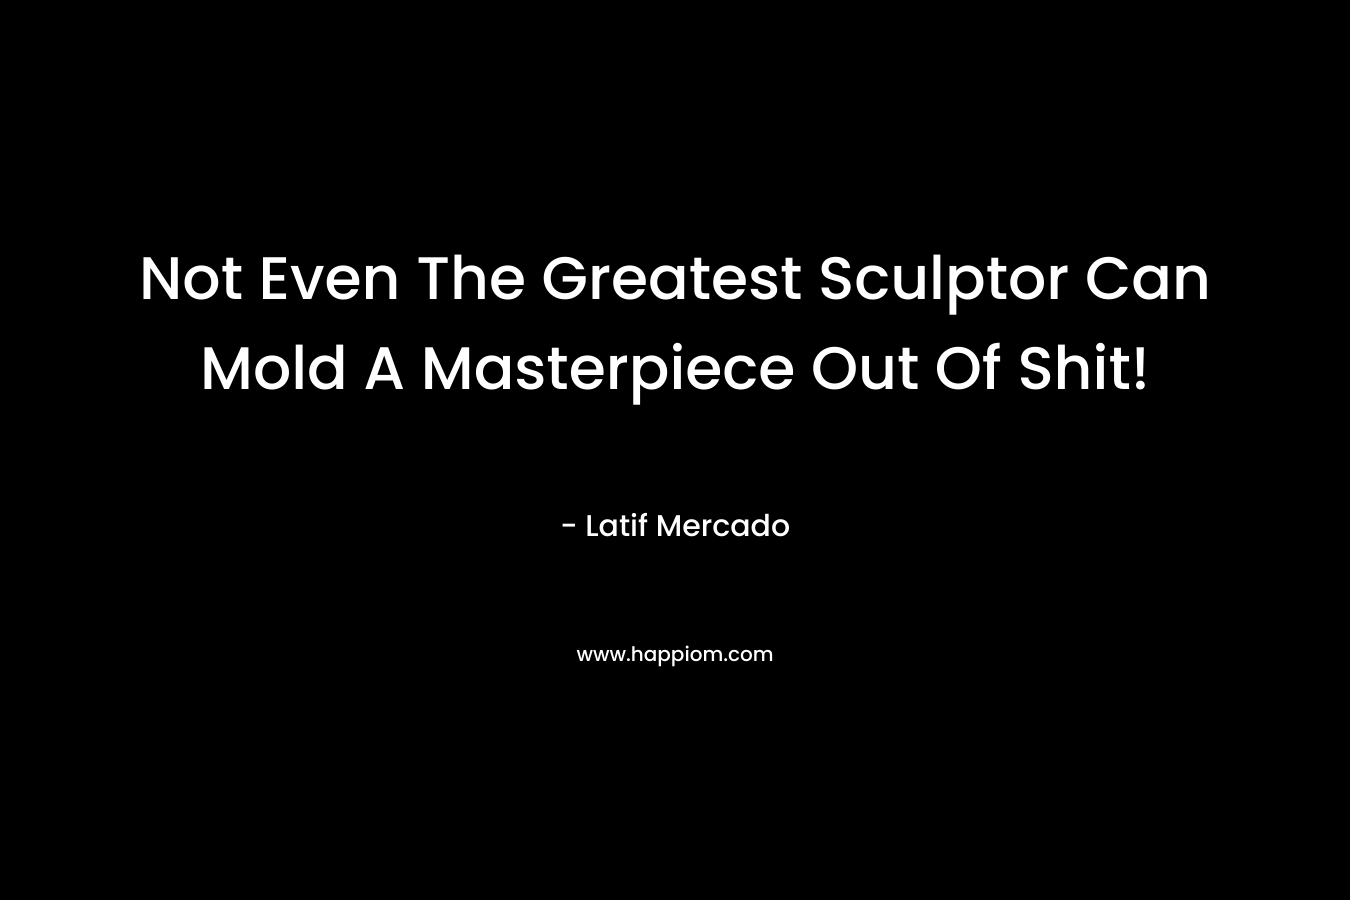 Not Even The Greatest Sculptor Can Mold A Masterpiece Out Of Shit! – Latif Mercado